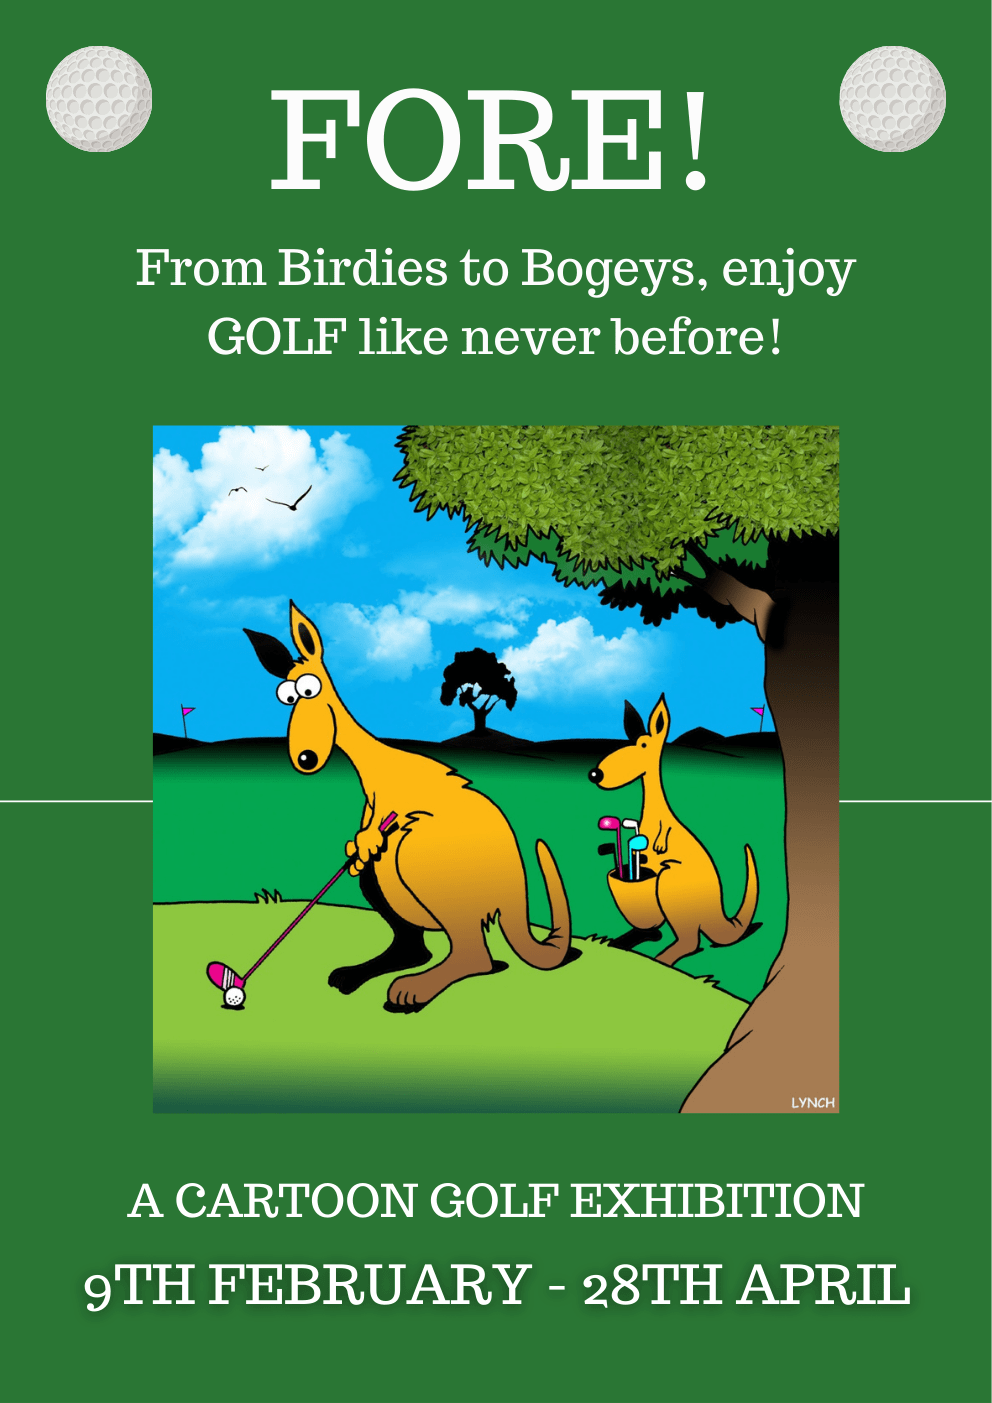 Copy of Fore! A Cartoon Golf Exhibition.